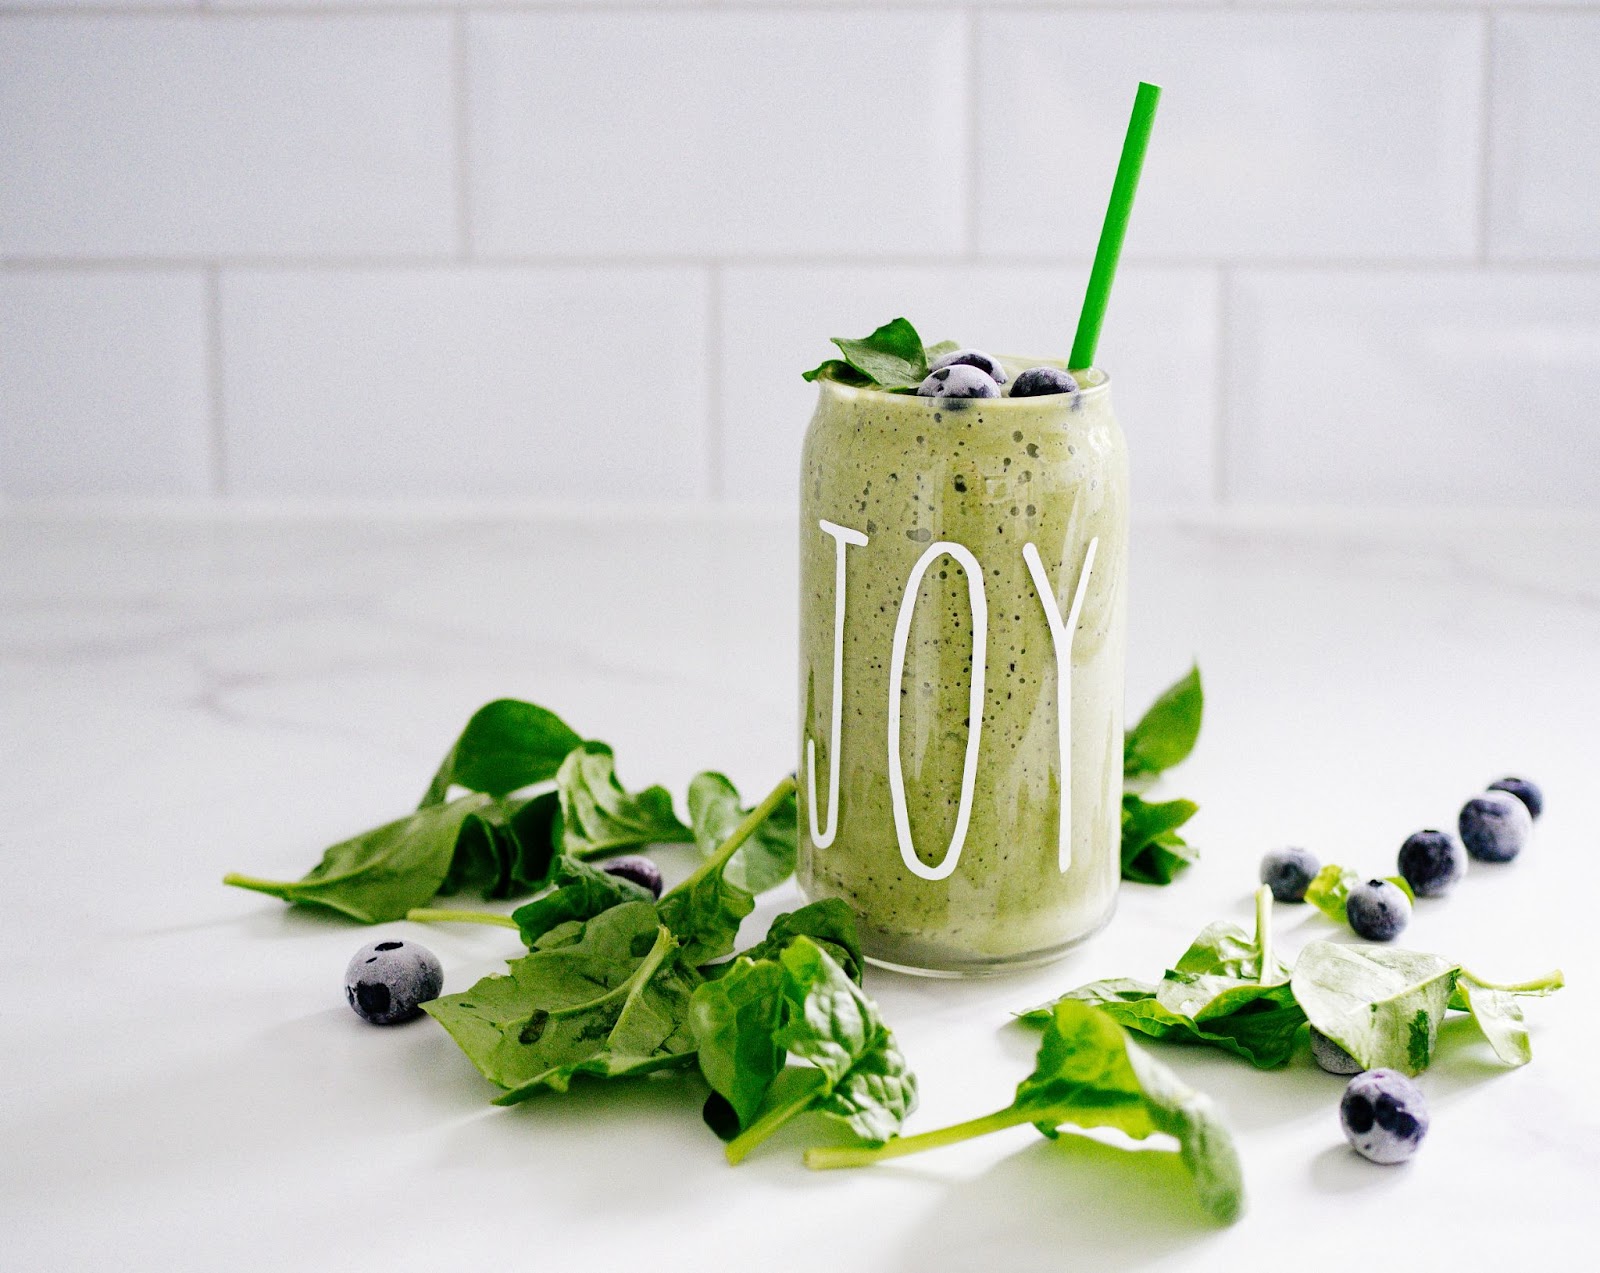 Green smoothie with "joy" written on glass